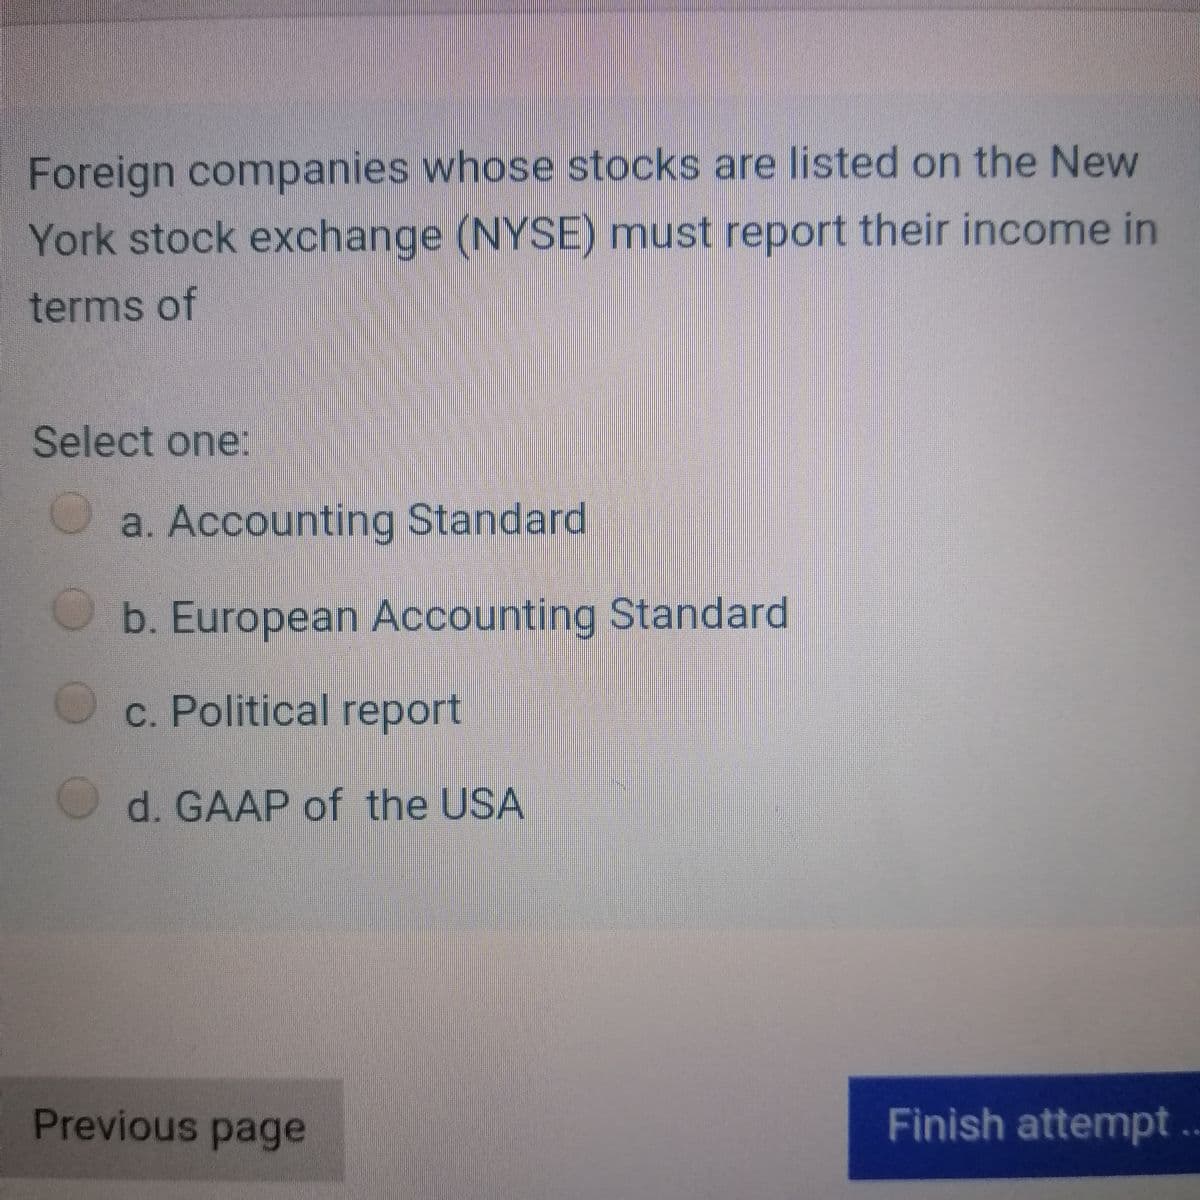 Foreign companies whose stocks are listed on the New
York stock exchange (NYSE) must report their income in
terms of
Select one:
a. Accounting Standard
b. European Accounting Standard
c. Political report
d. GAAP of the USA
Previous page
Finish attempt ..
